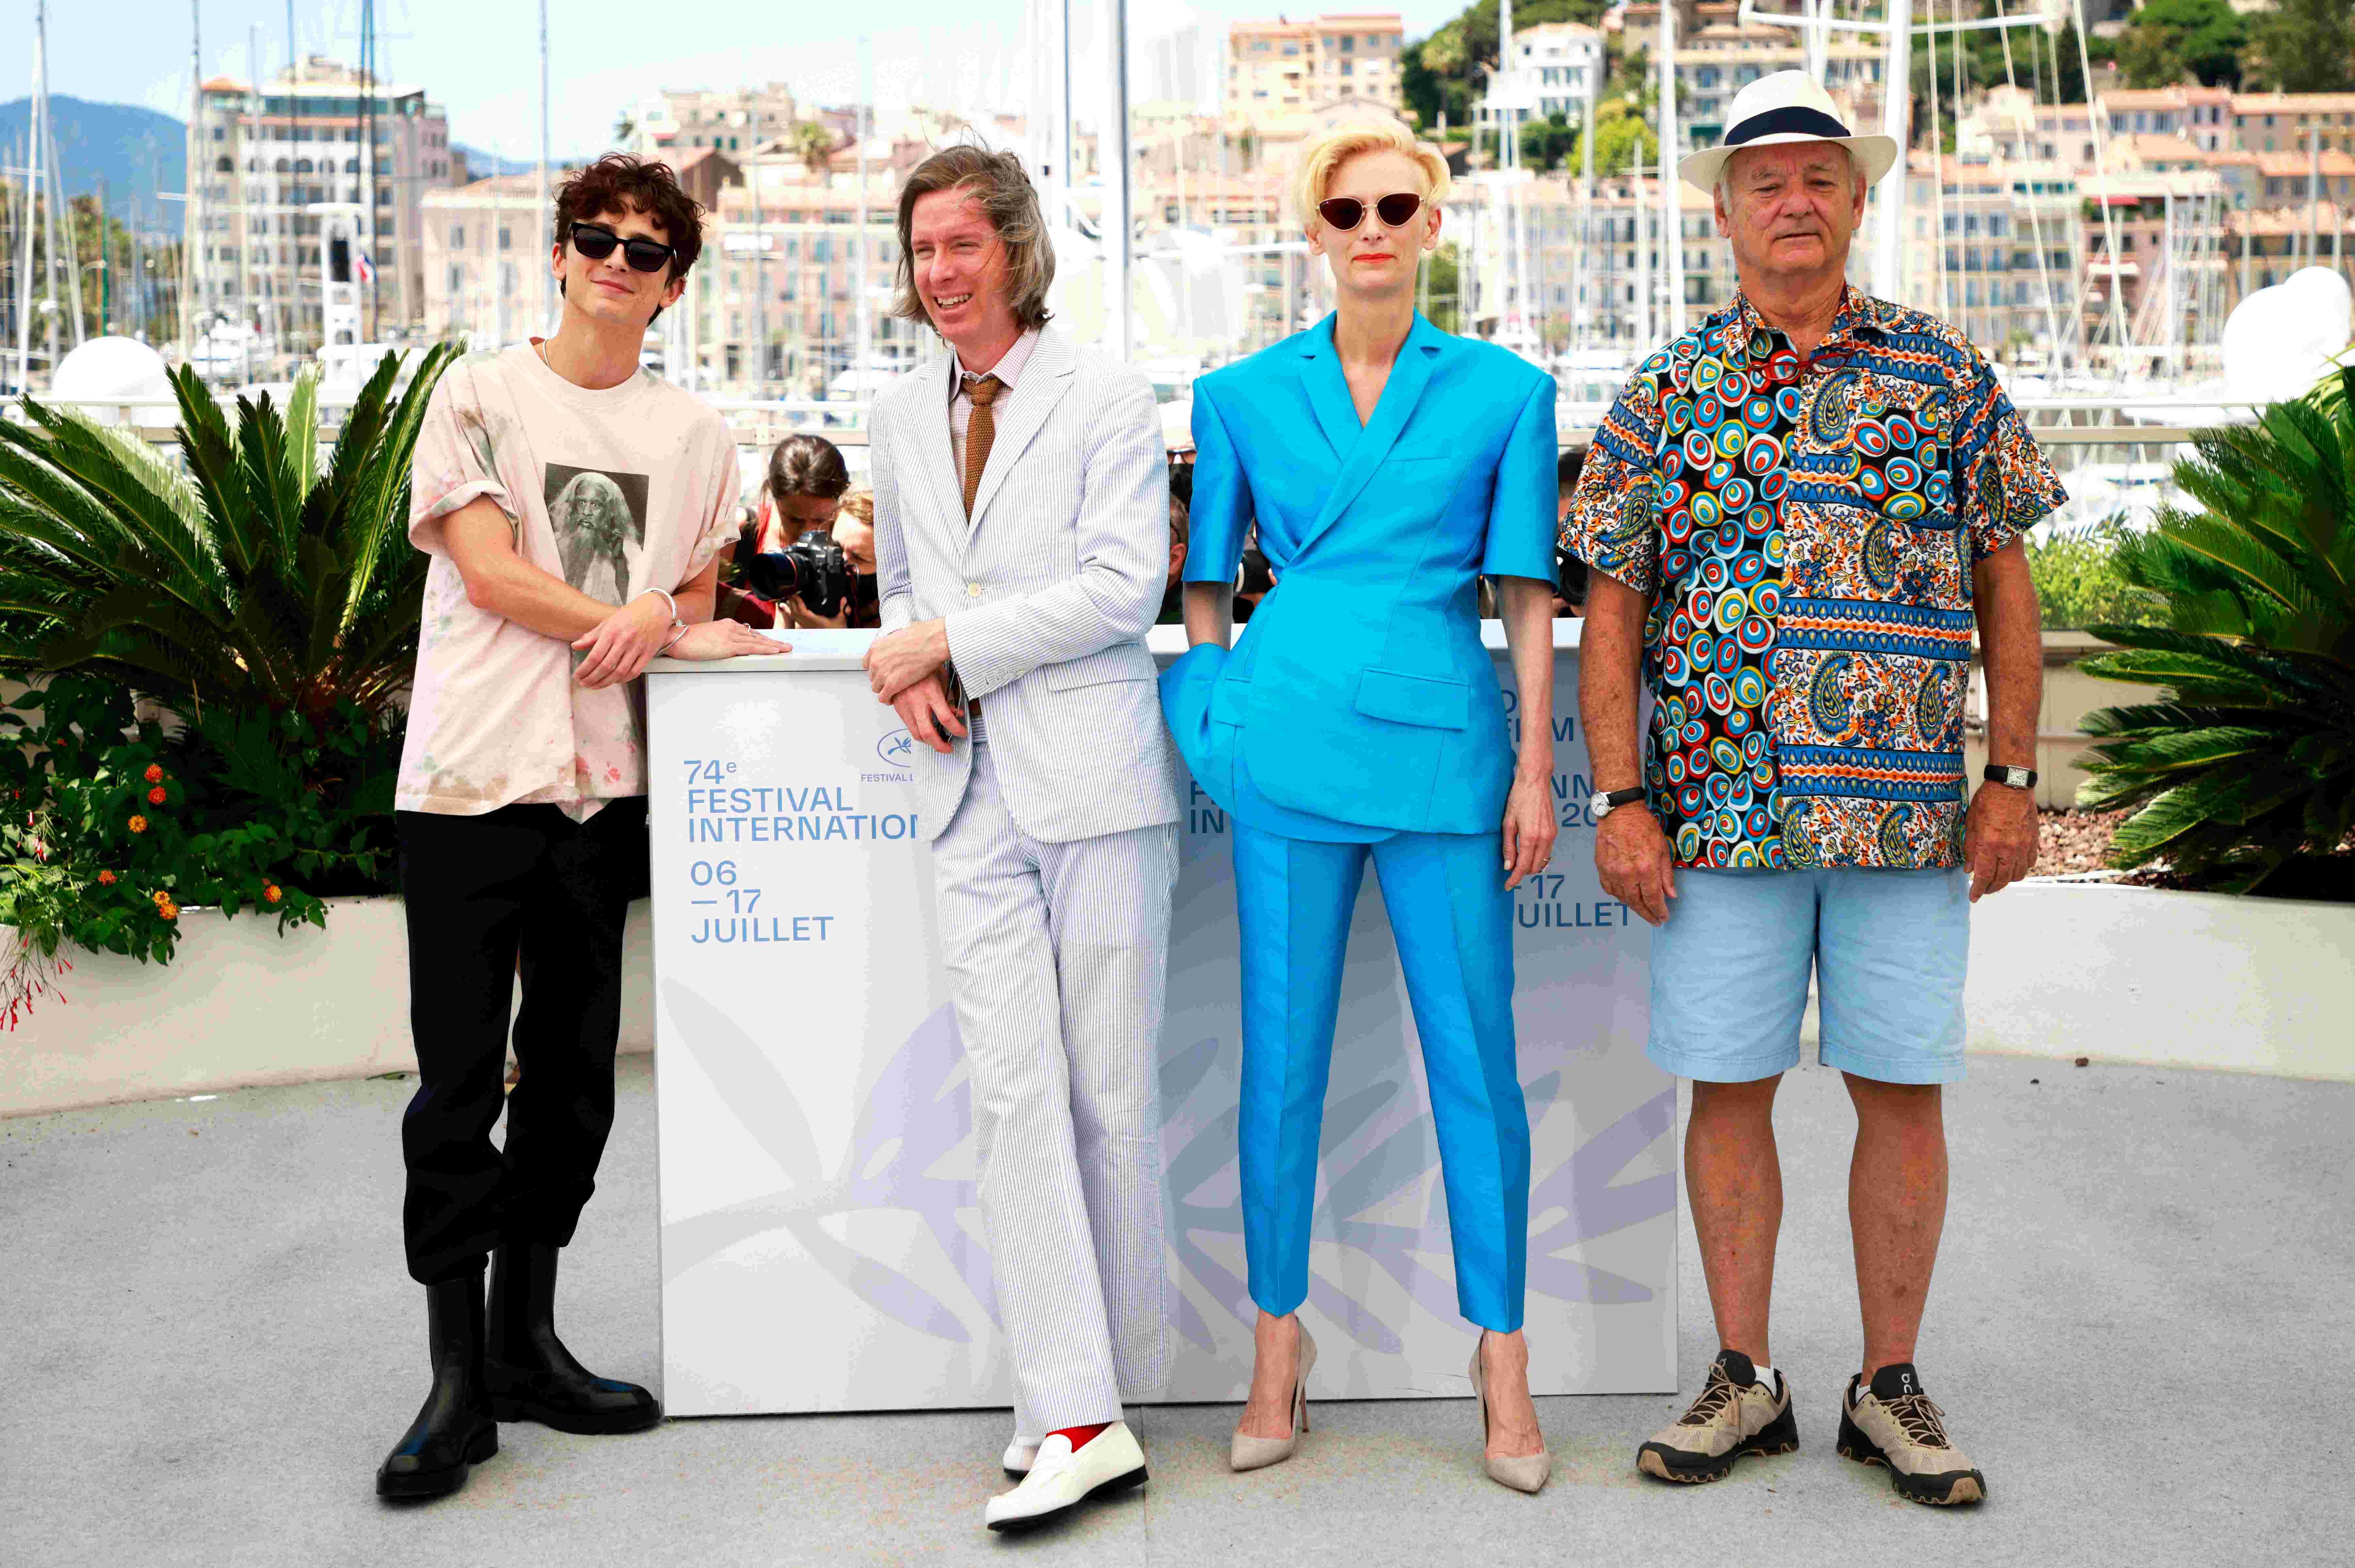 Wes Anderson brings stars together for ‘The French Dispatch’ at Cannes